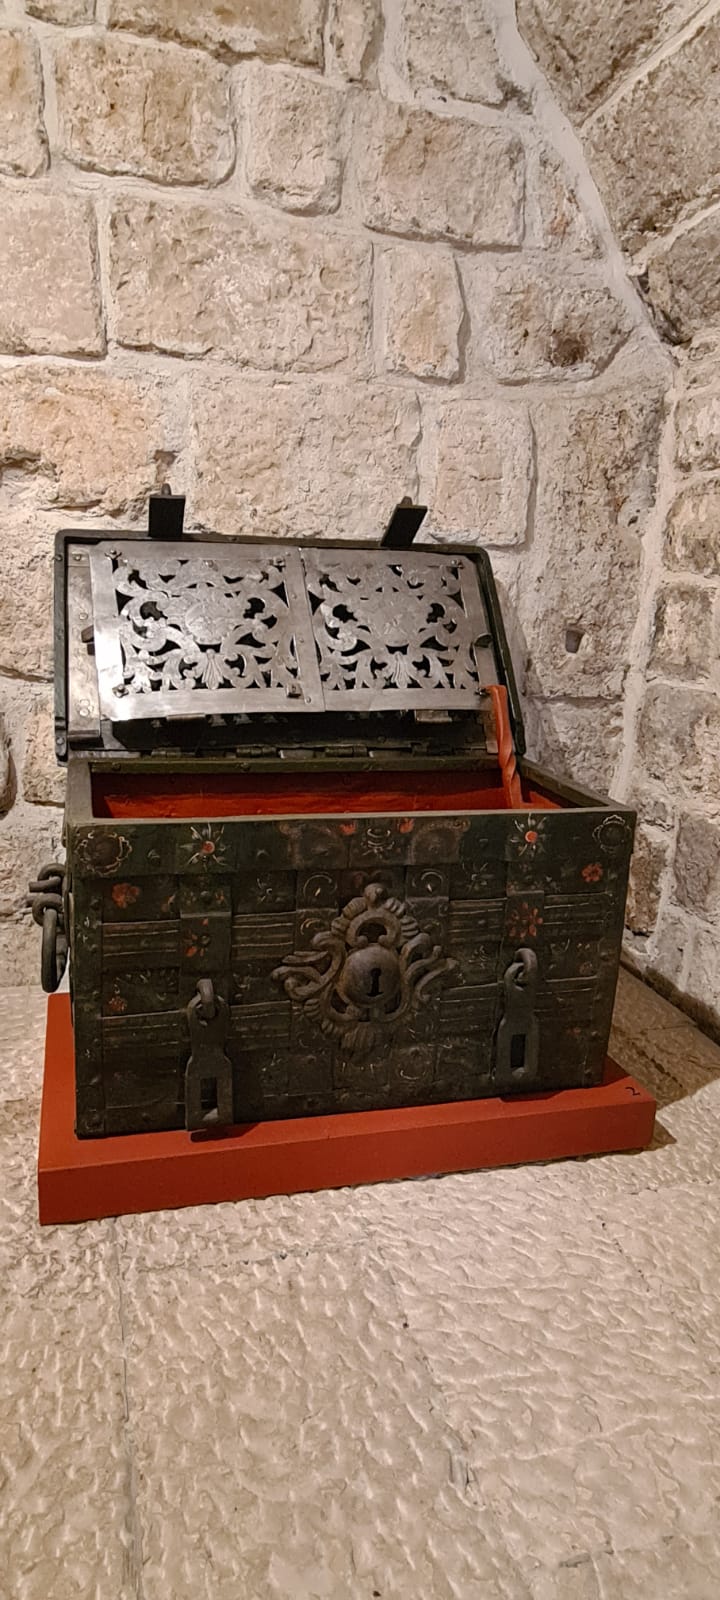 Nuremberg chest, XVIIth century, now on display at the Dubrovnick Rector's Palace in Croatia